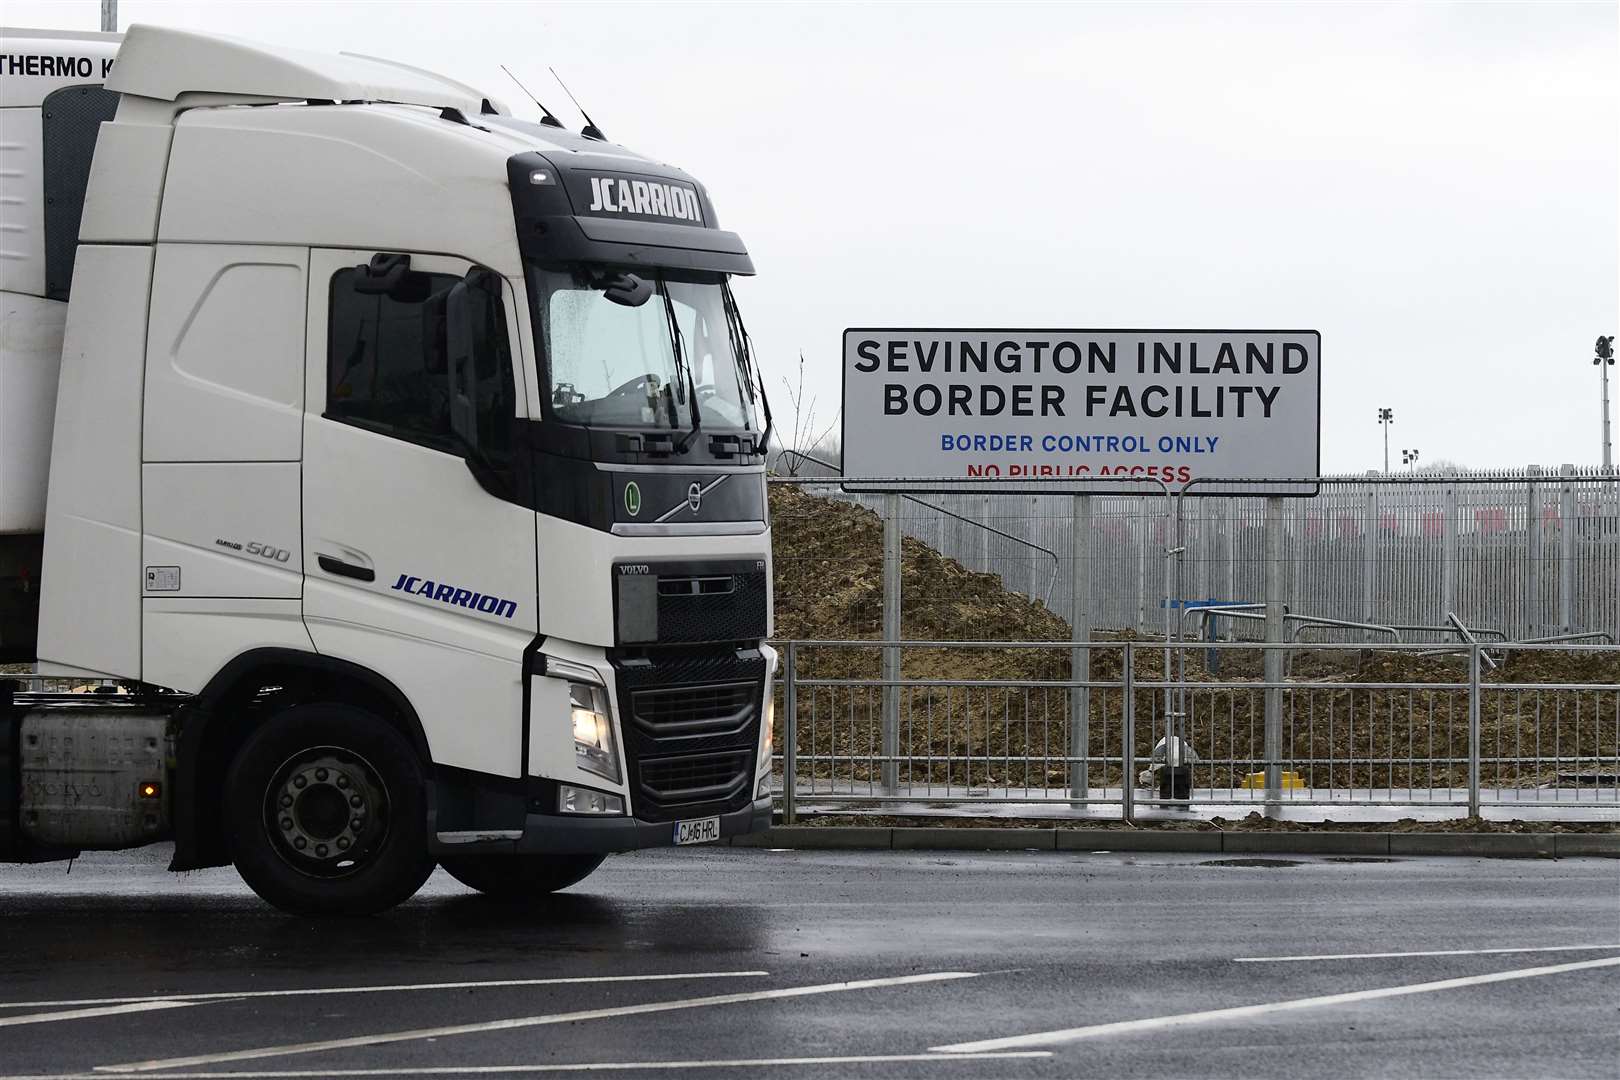 Half of all UK imports could come through the new Sevington Inland Border Facility. Picture: Barry Goodwin